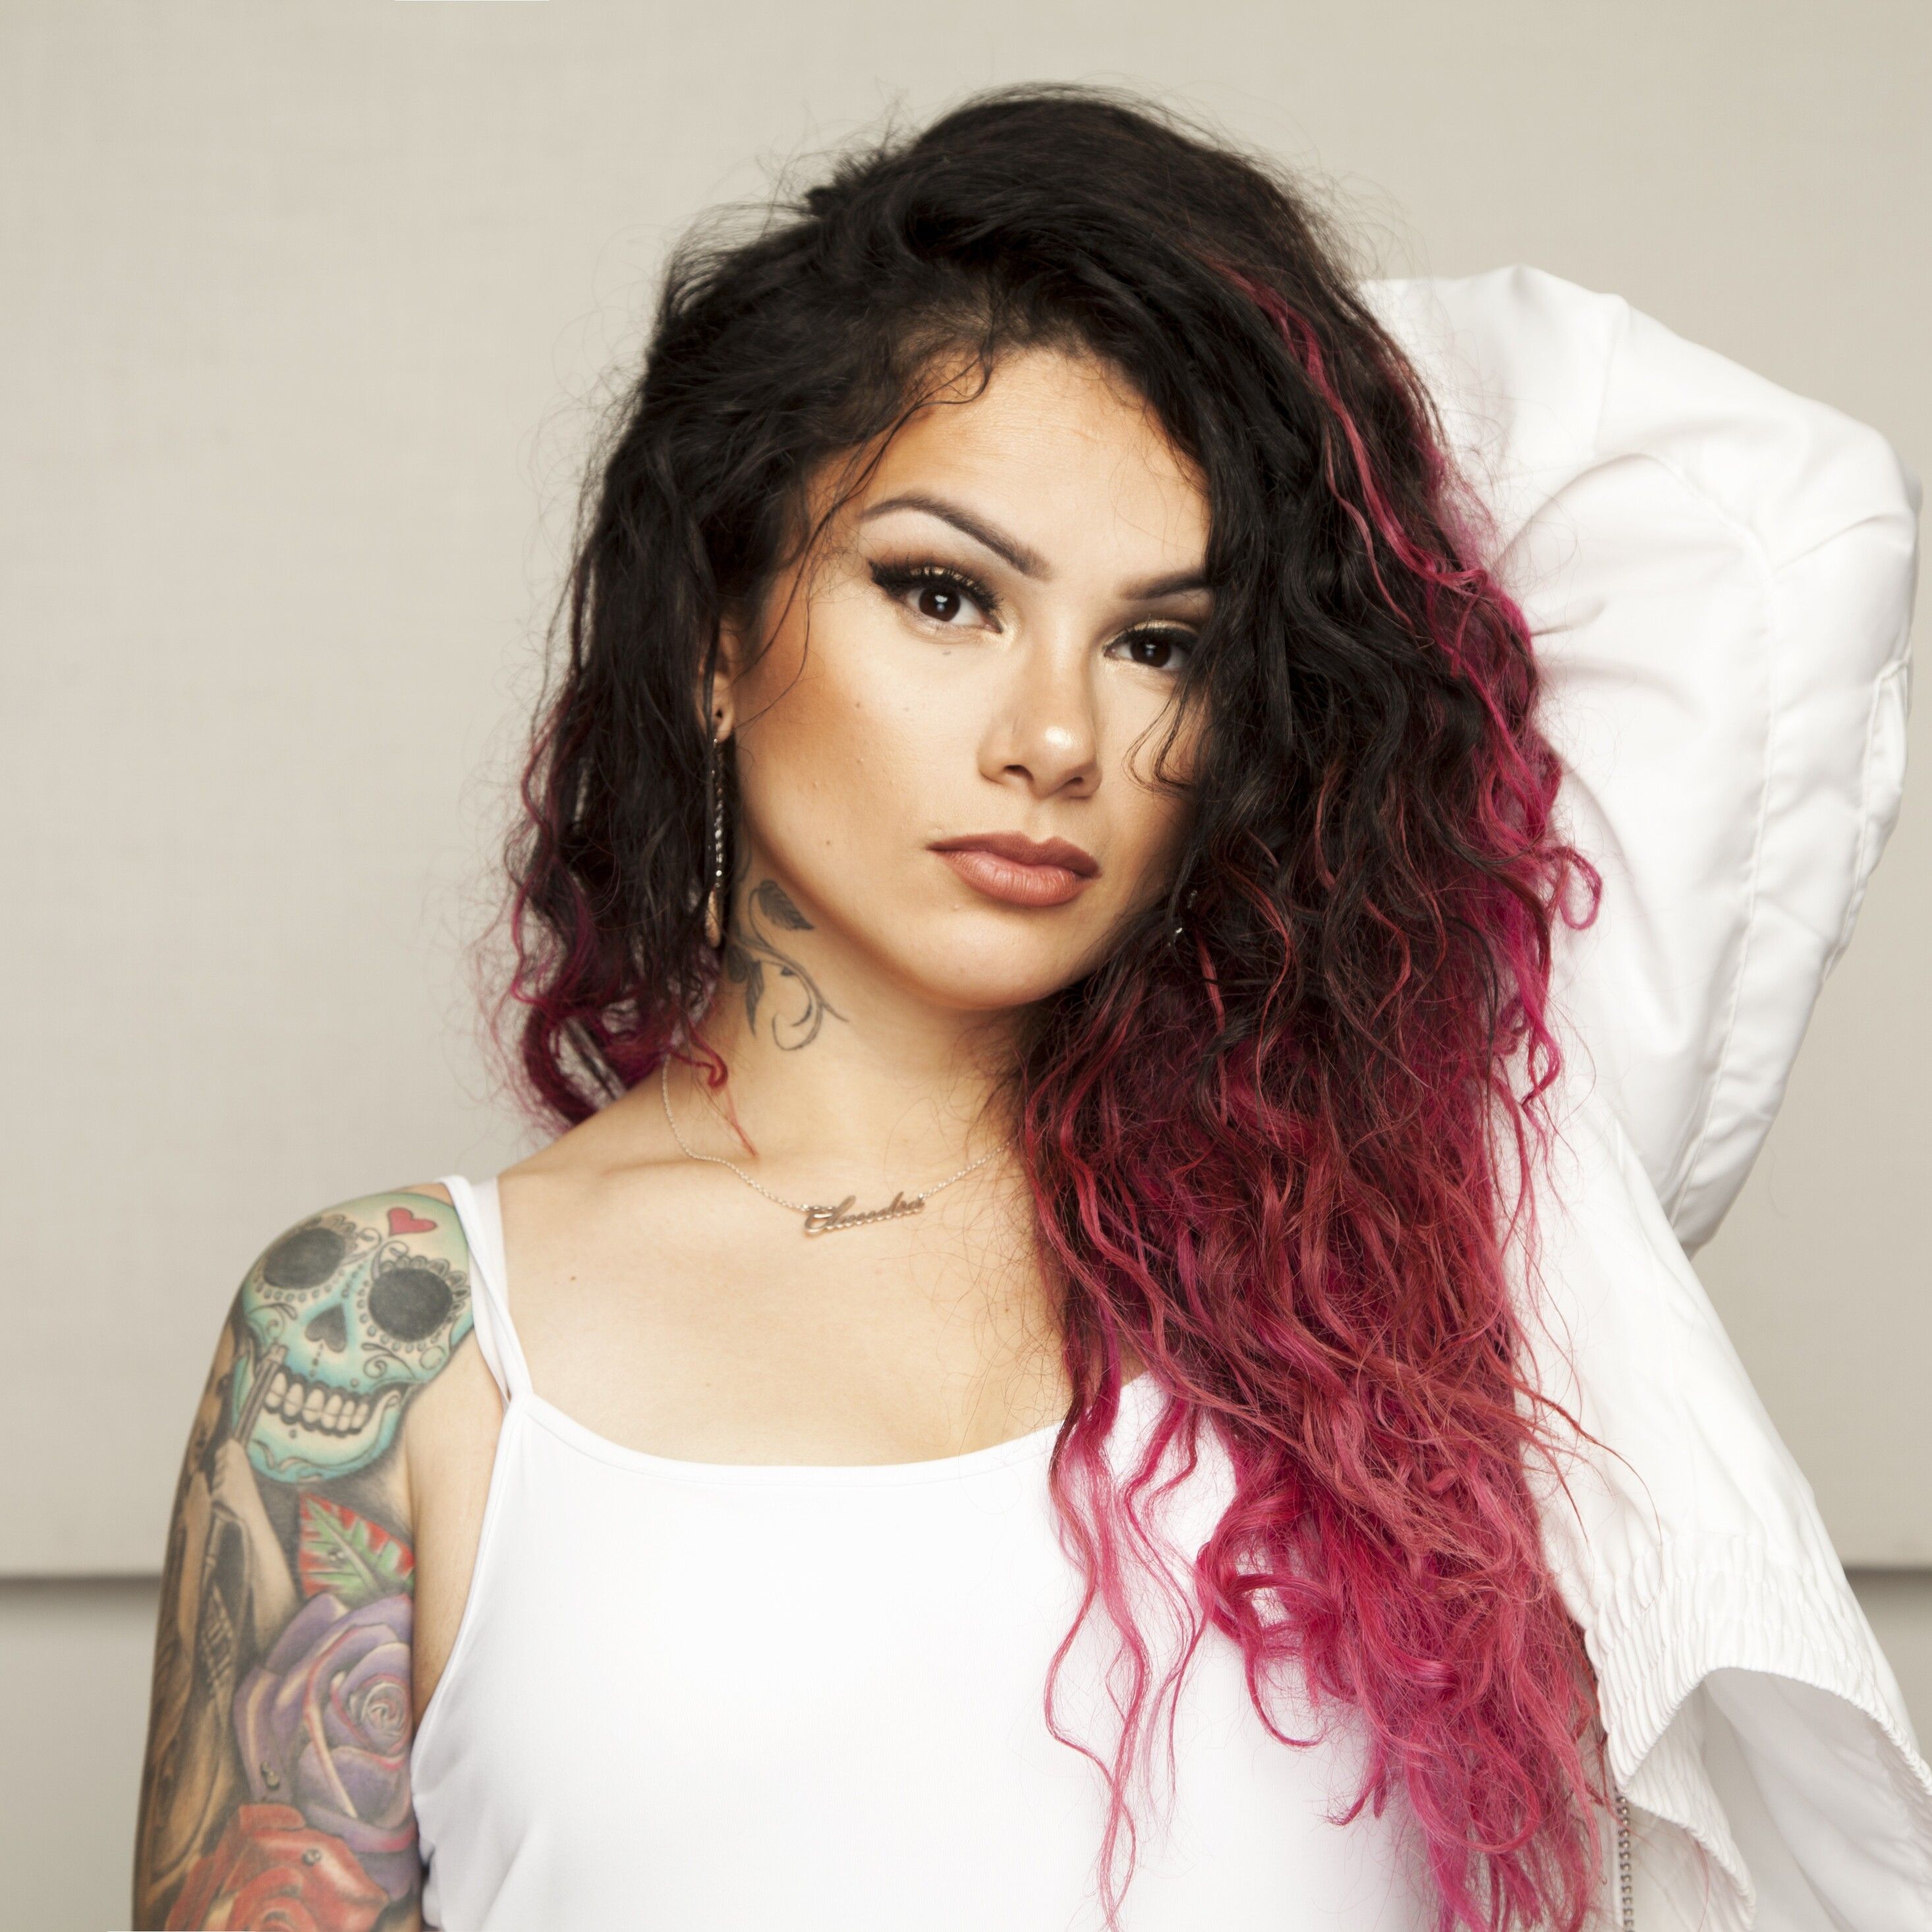 Snow Tha Product Wallpapers Wallpaper Cave